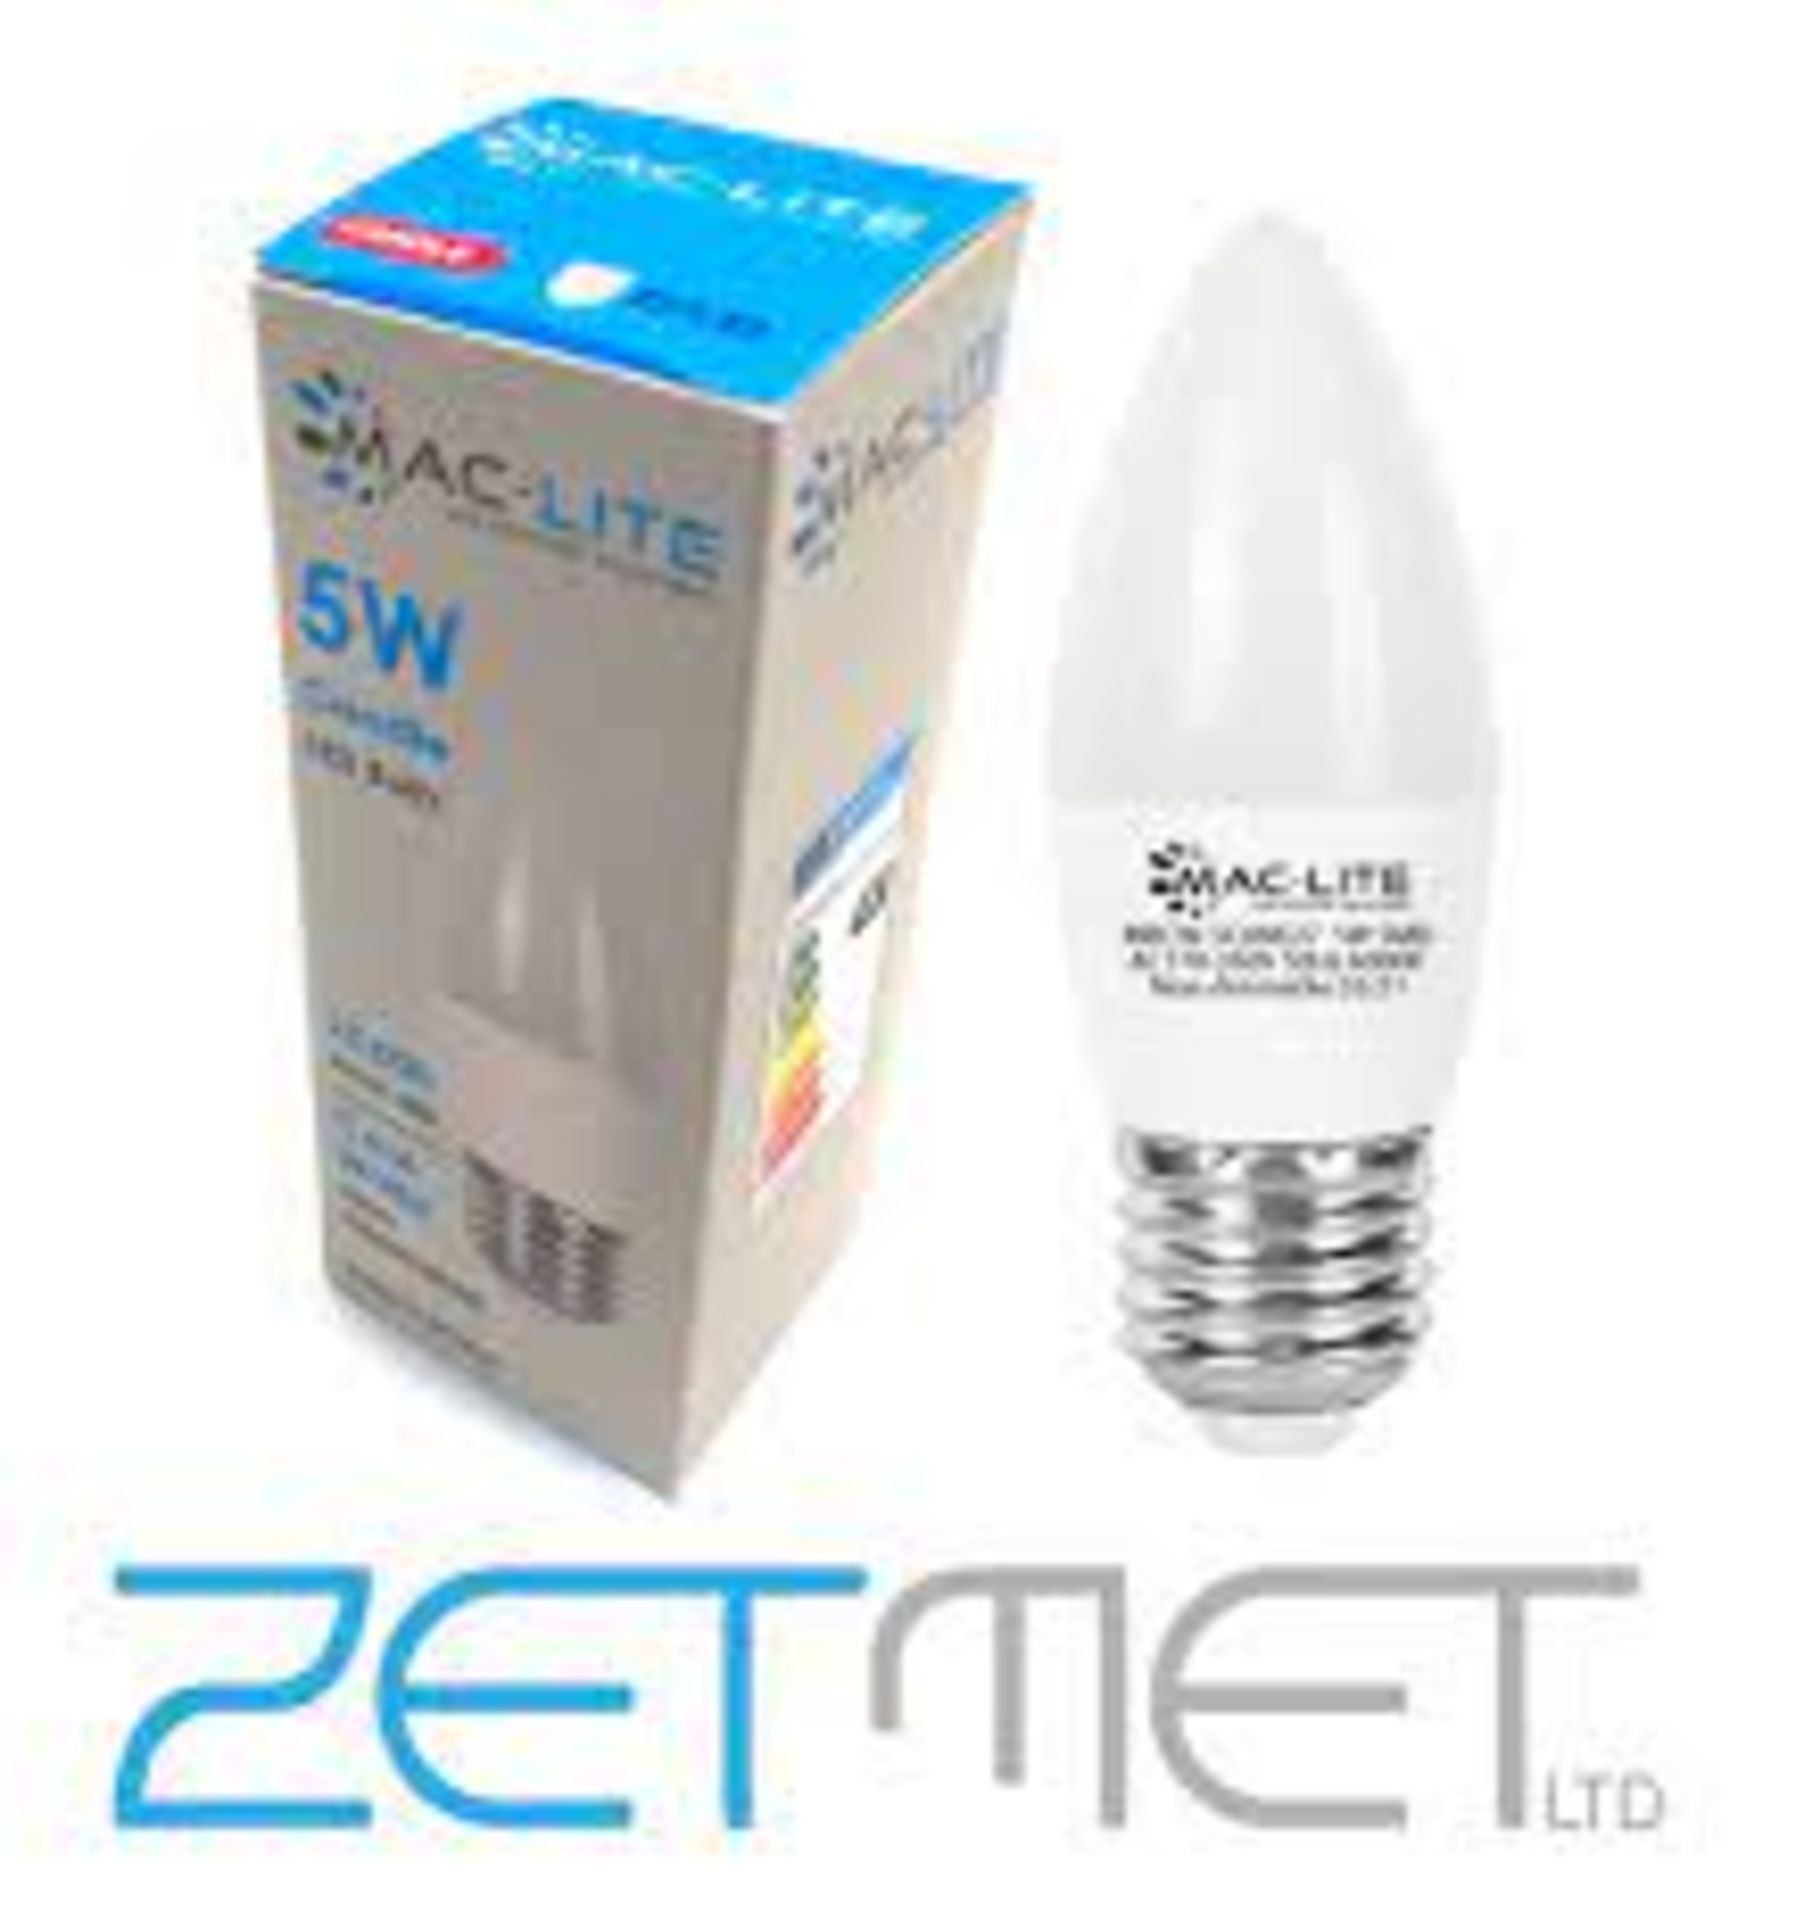 (ONE LOT SALE) 40,000 BRAND NEW MACLITE LED LIGHT BULBS IN VARIOUS FITTINGS - Image 3 of 3